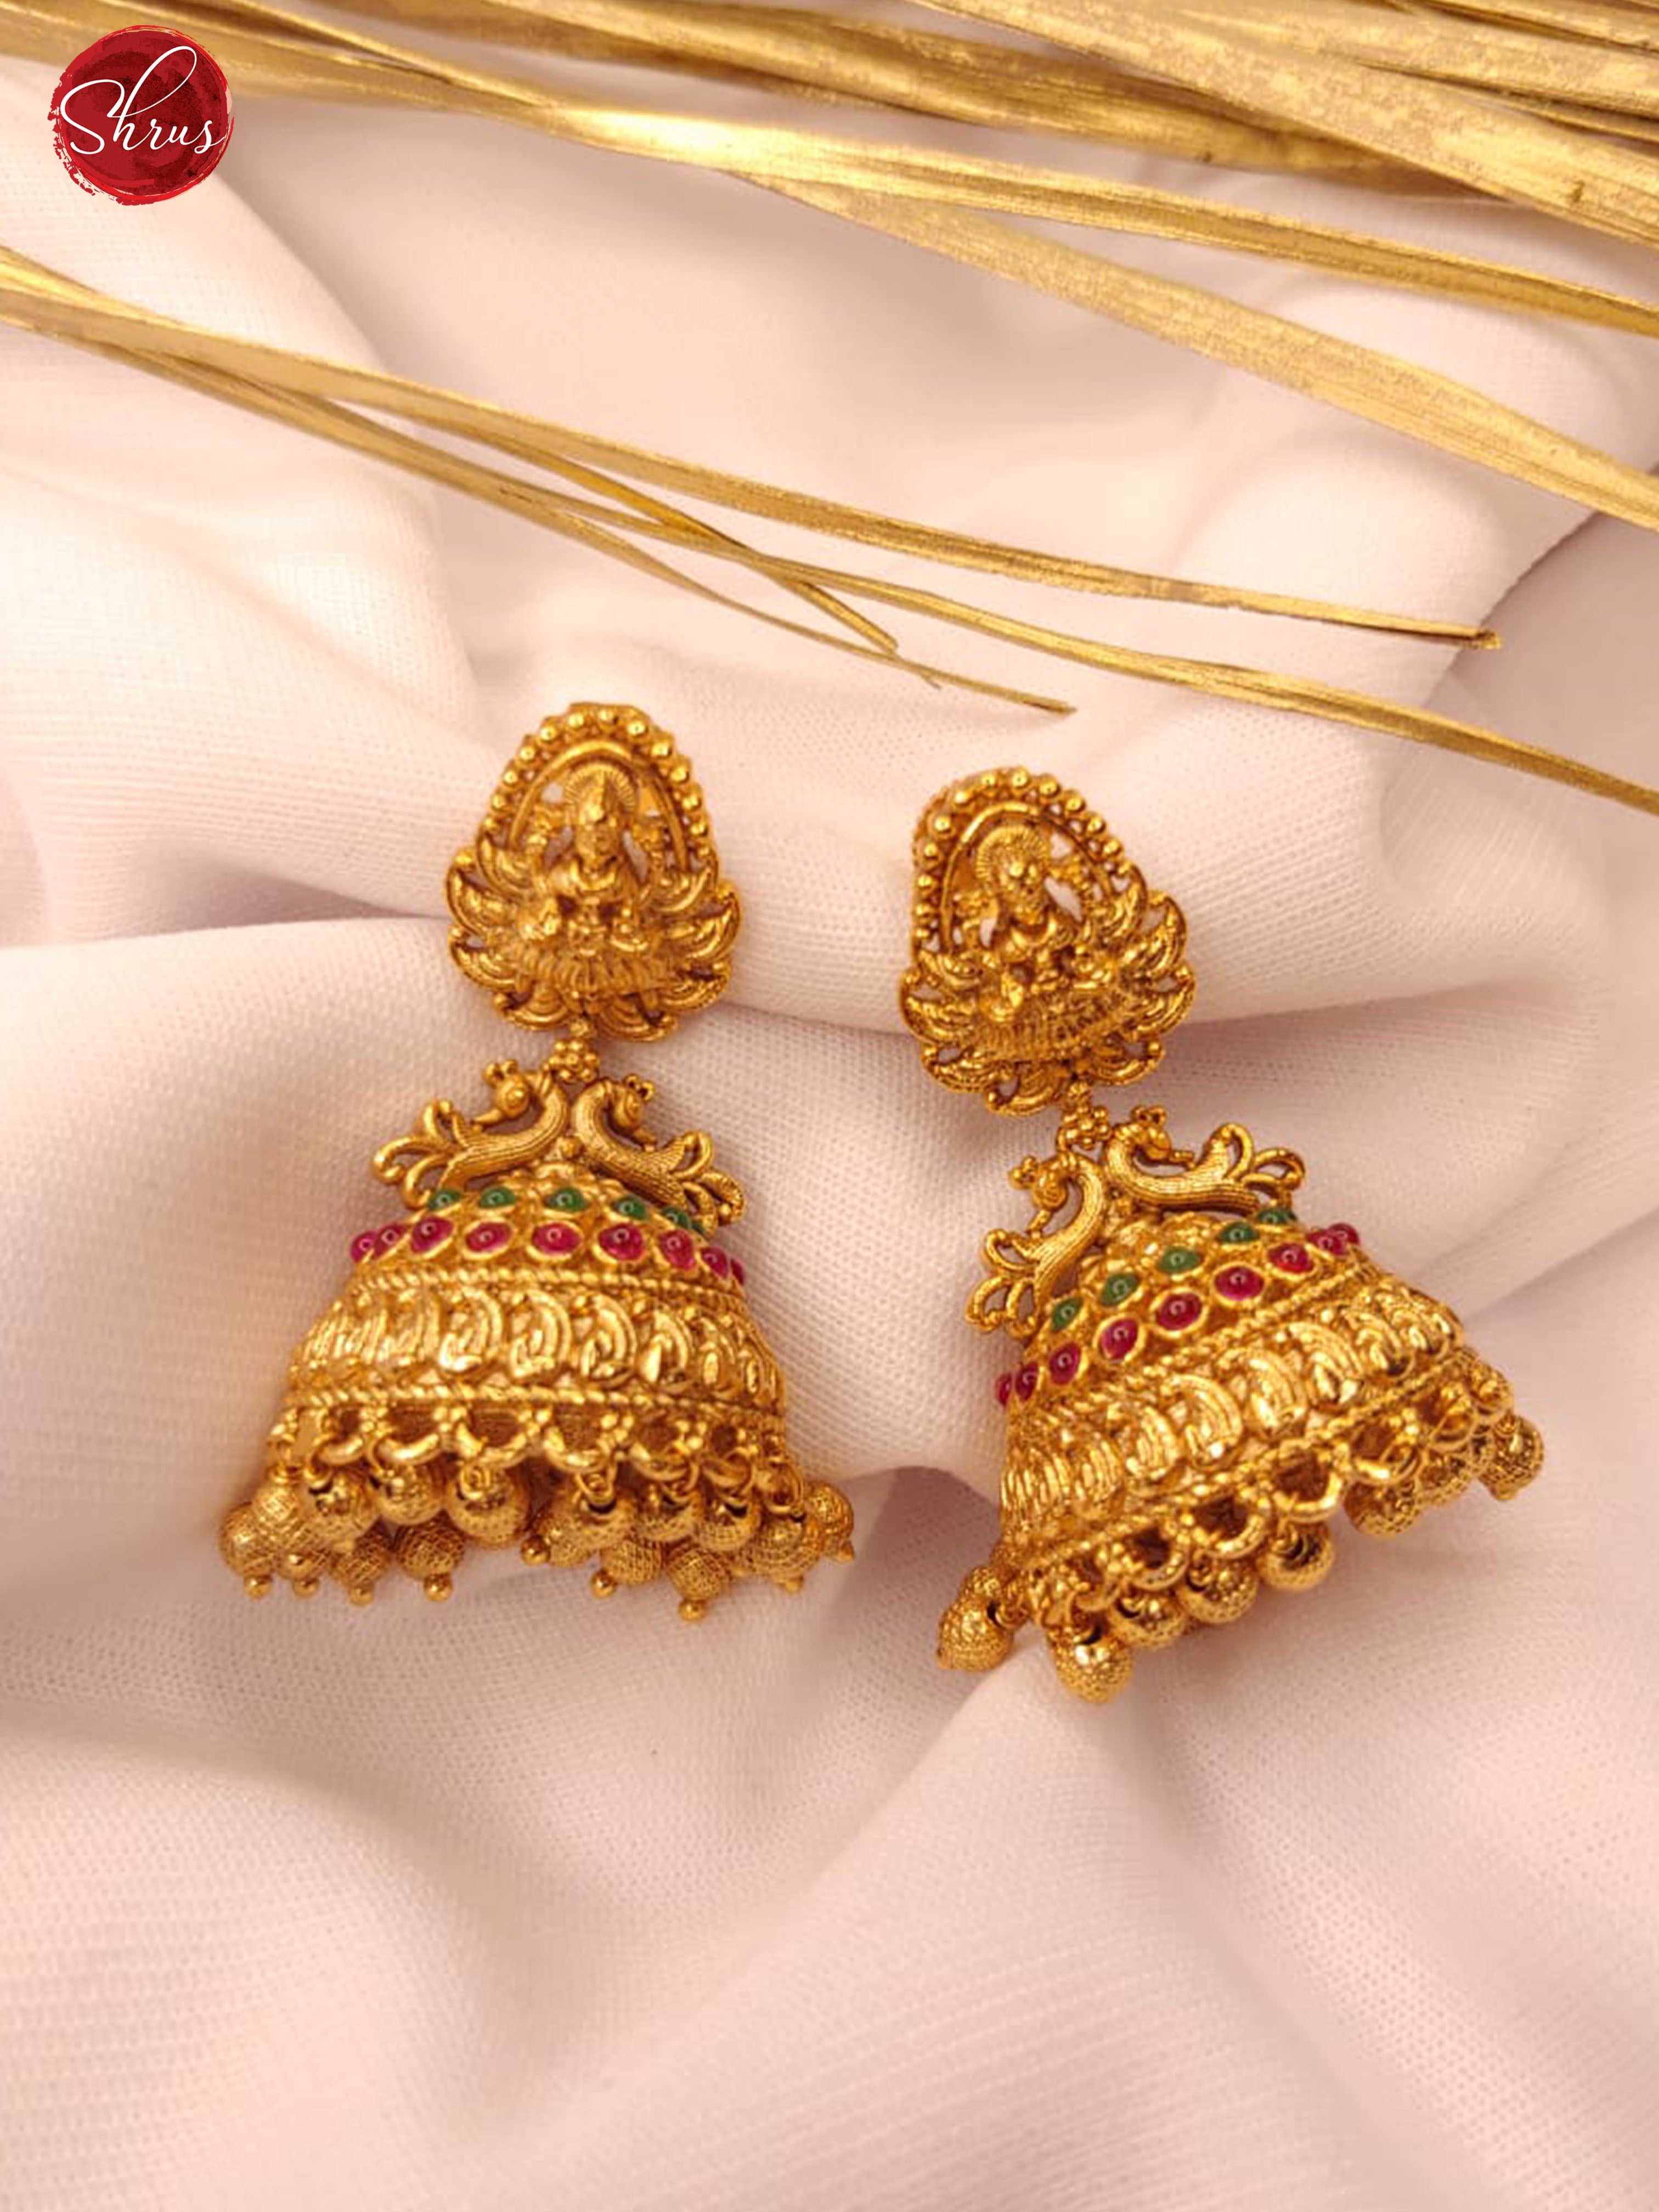 ACCESSORIES - EARRINGS (ARTIFICIAL) - Shop on ShrusEternity.com